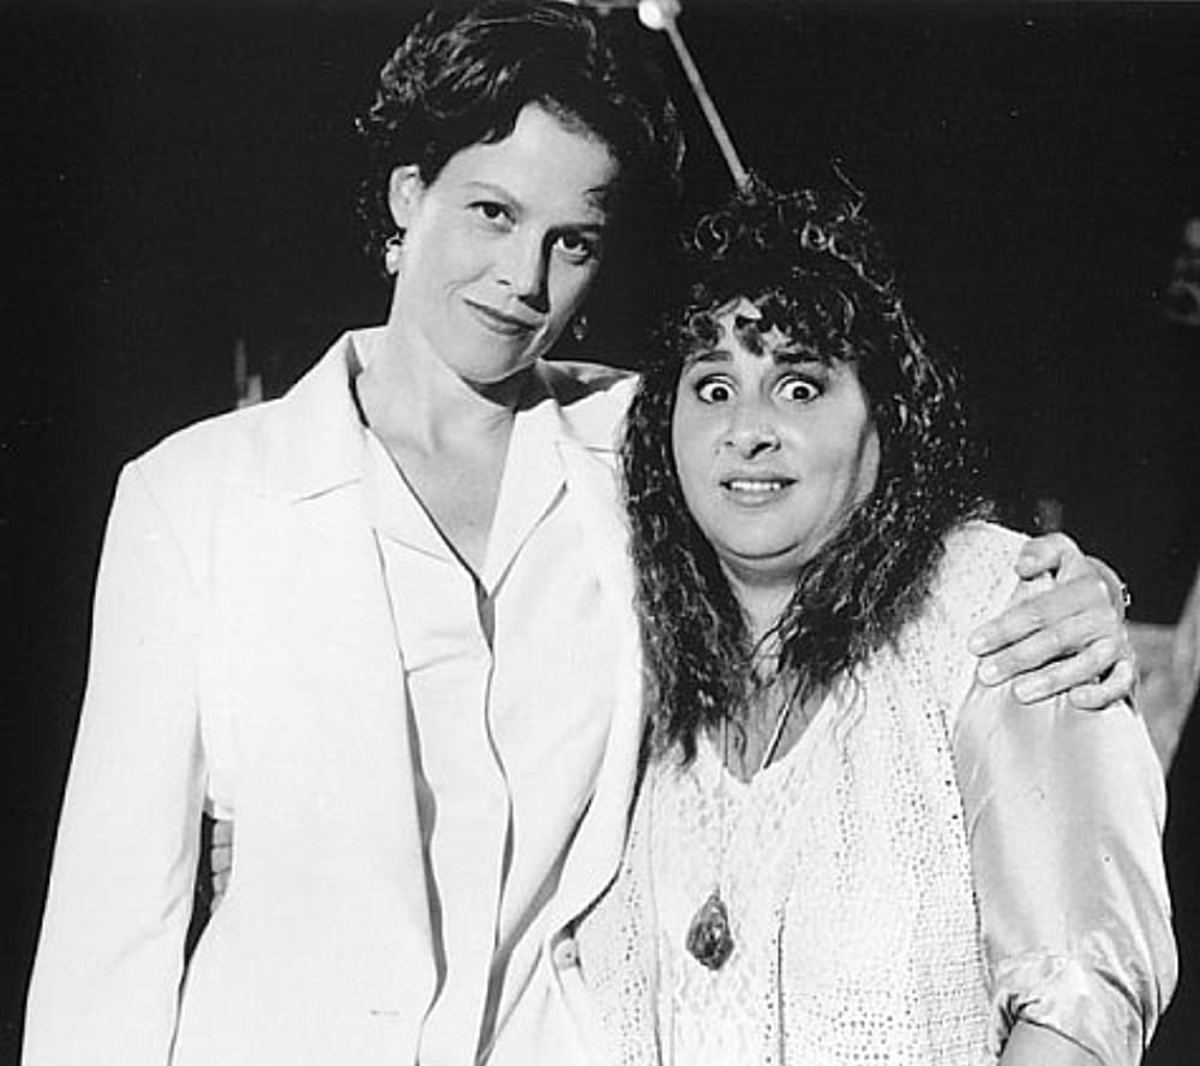 After belittling the audience member with a bad perm, Debra Moorhouse (Sigourney Weaver) poses for an uncomfortable picture